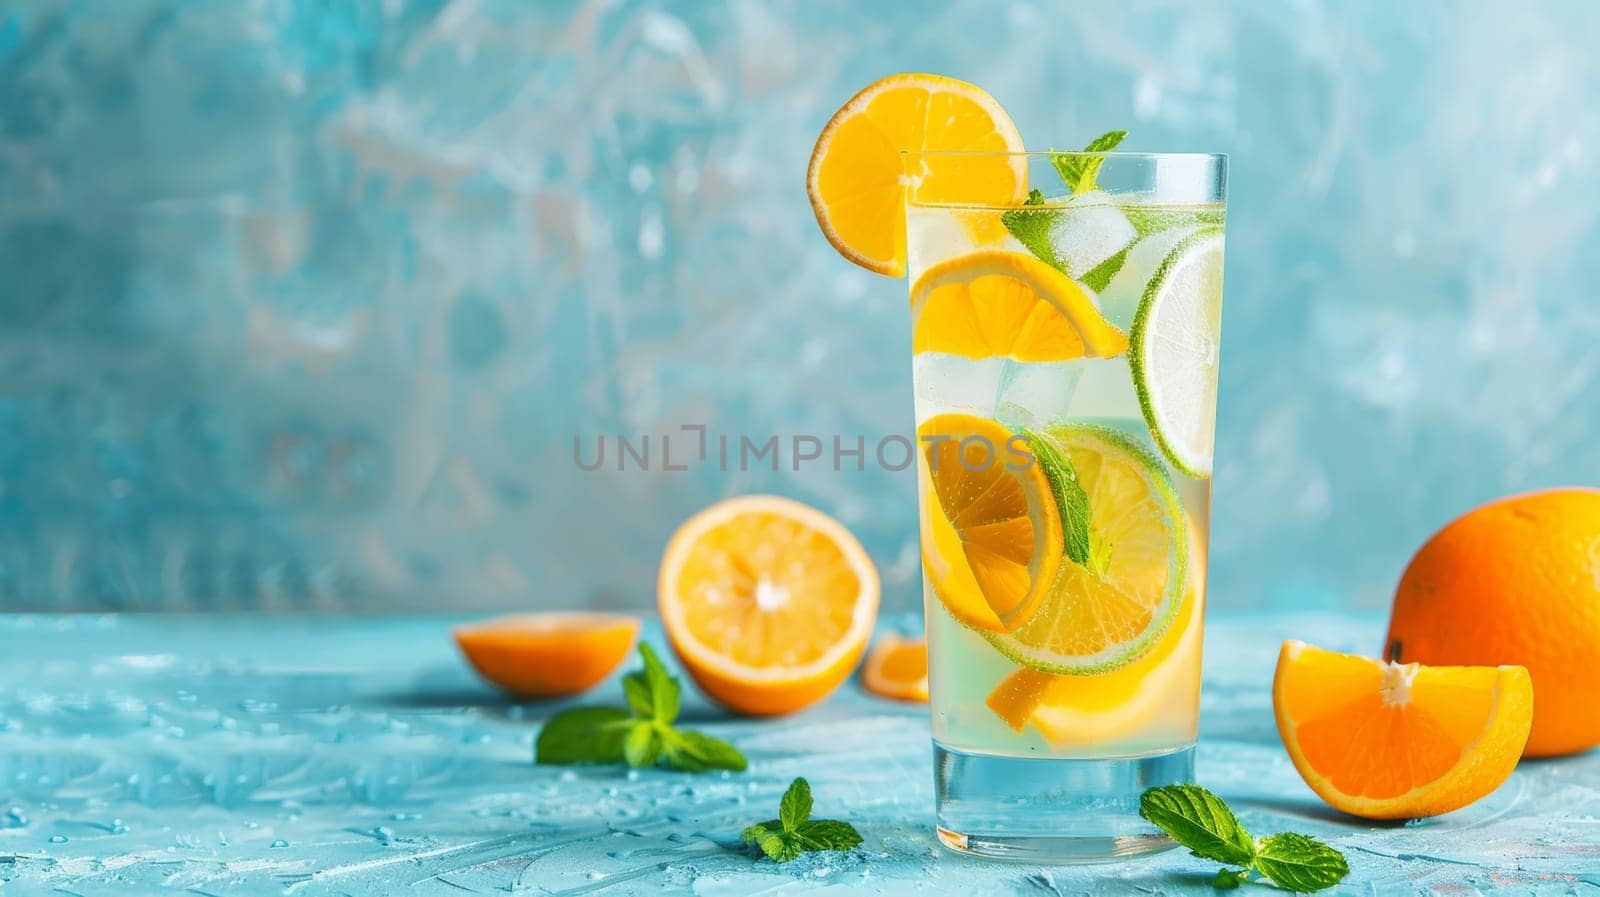 A tall glass of citrus refreshment filled with sparkling water, orange and lemon slices, and mint, on a textured blue surface